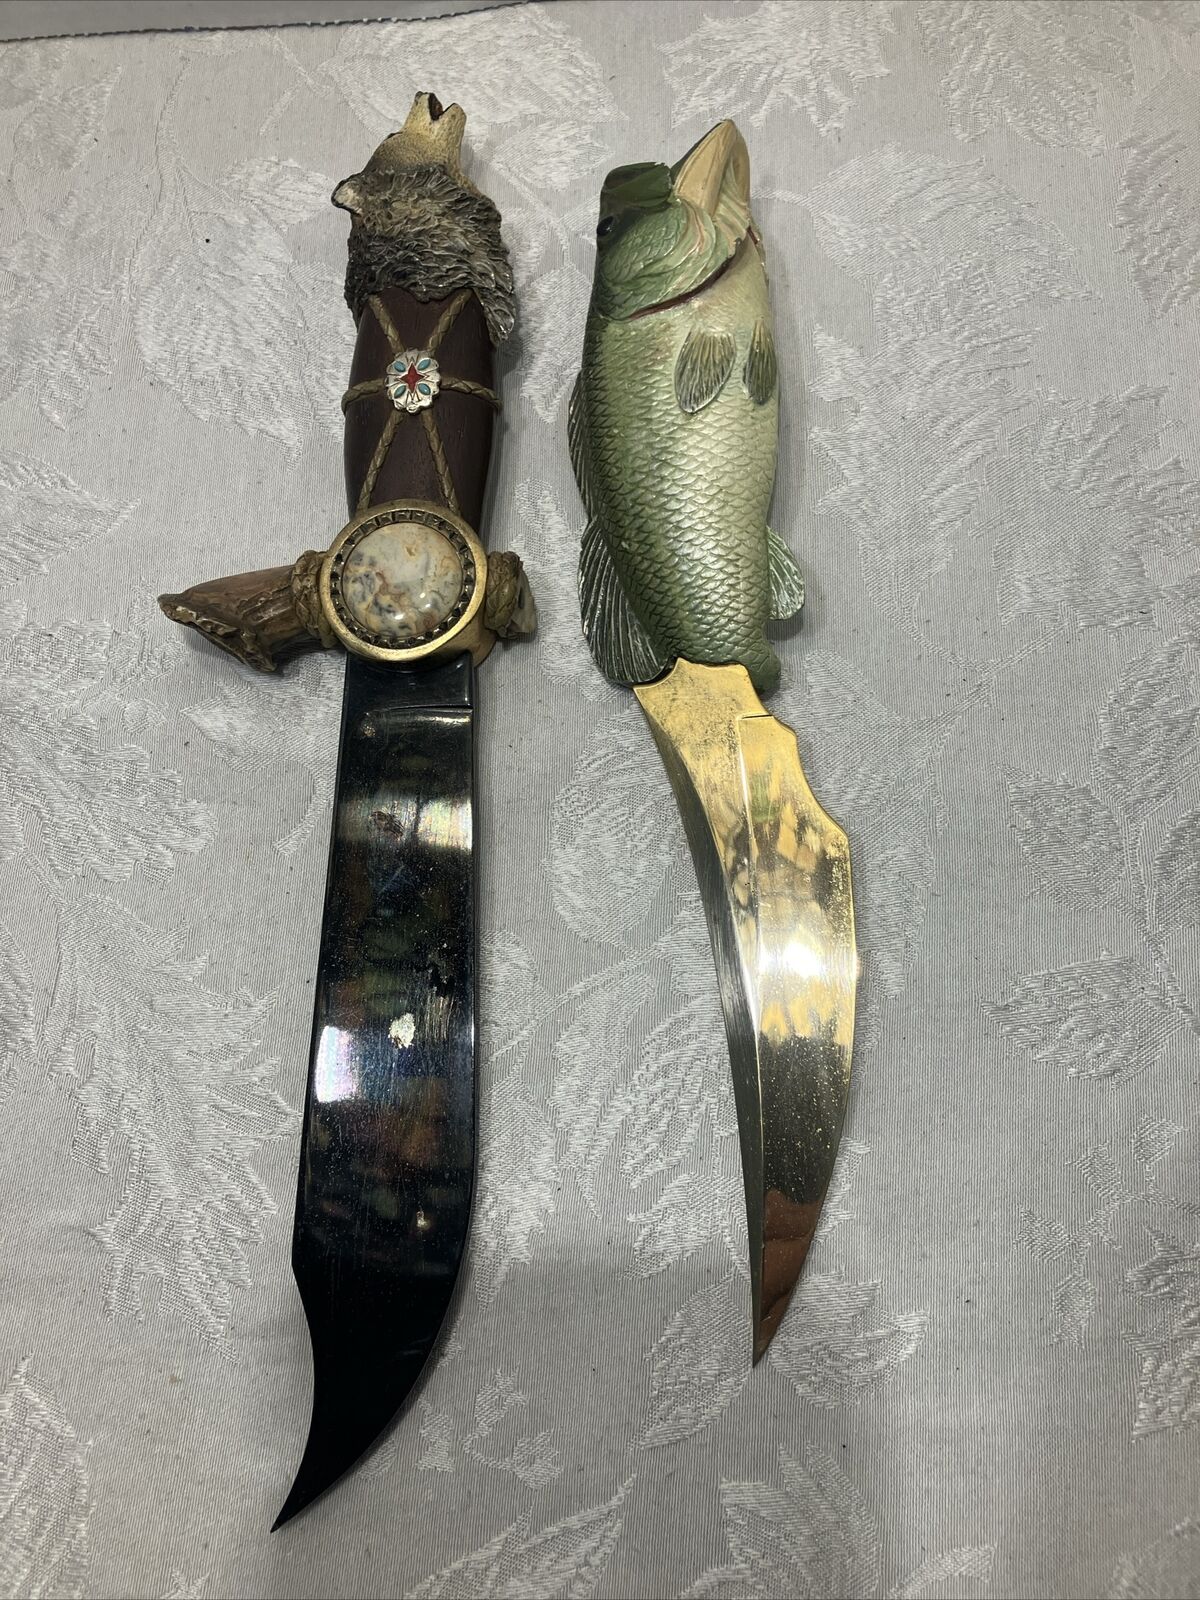 2 Franklin mint collector knives these knives have damage